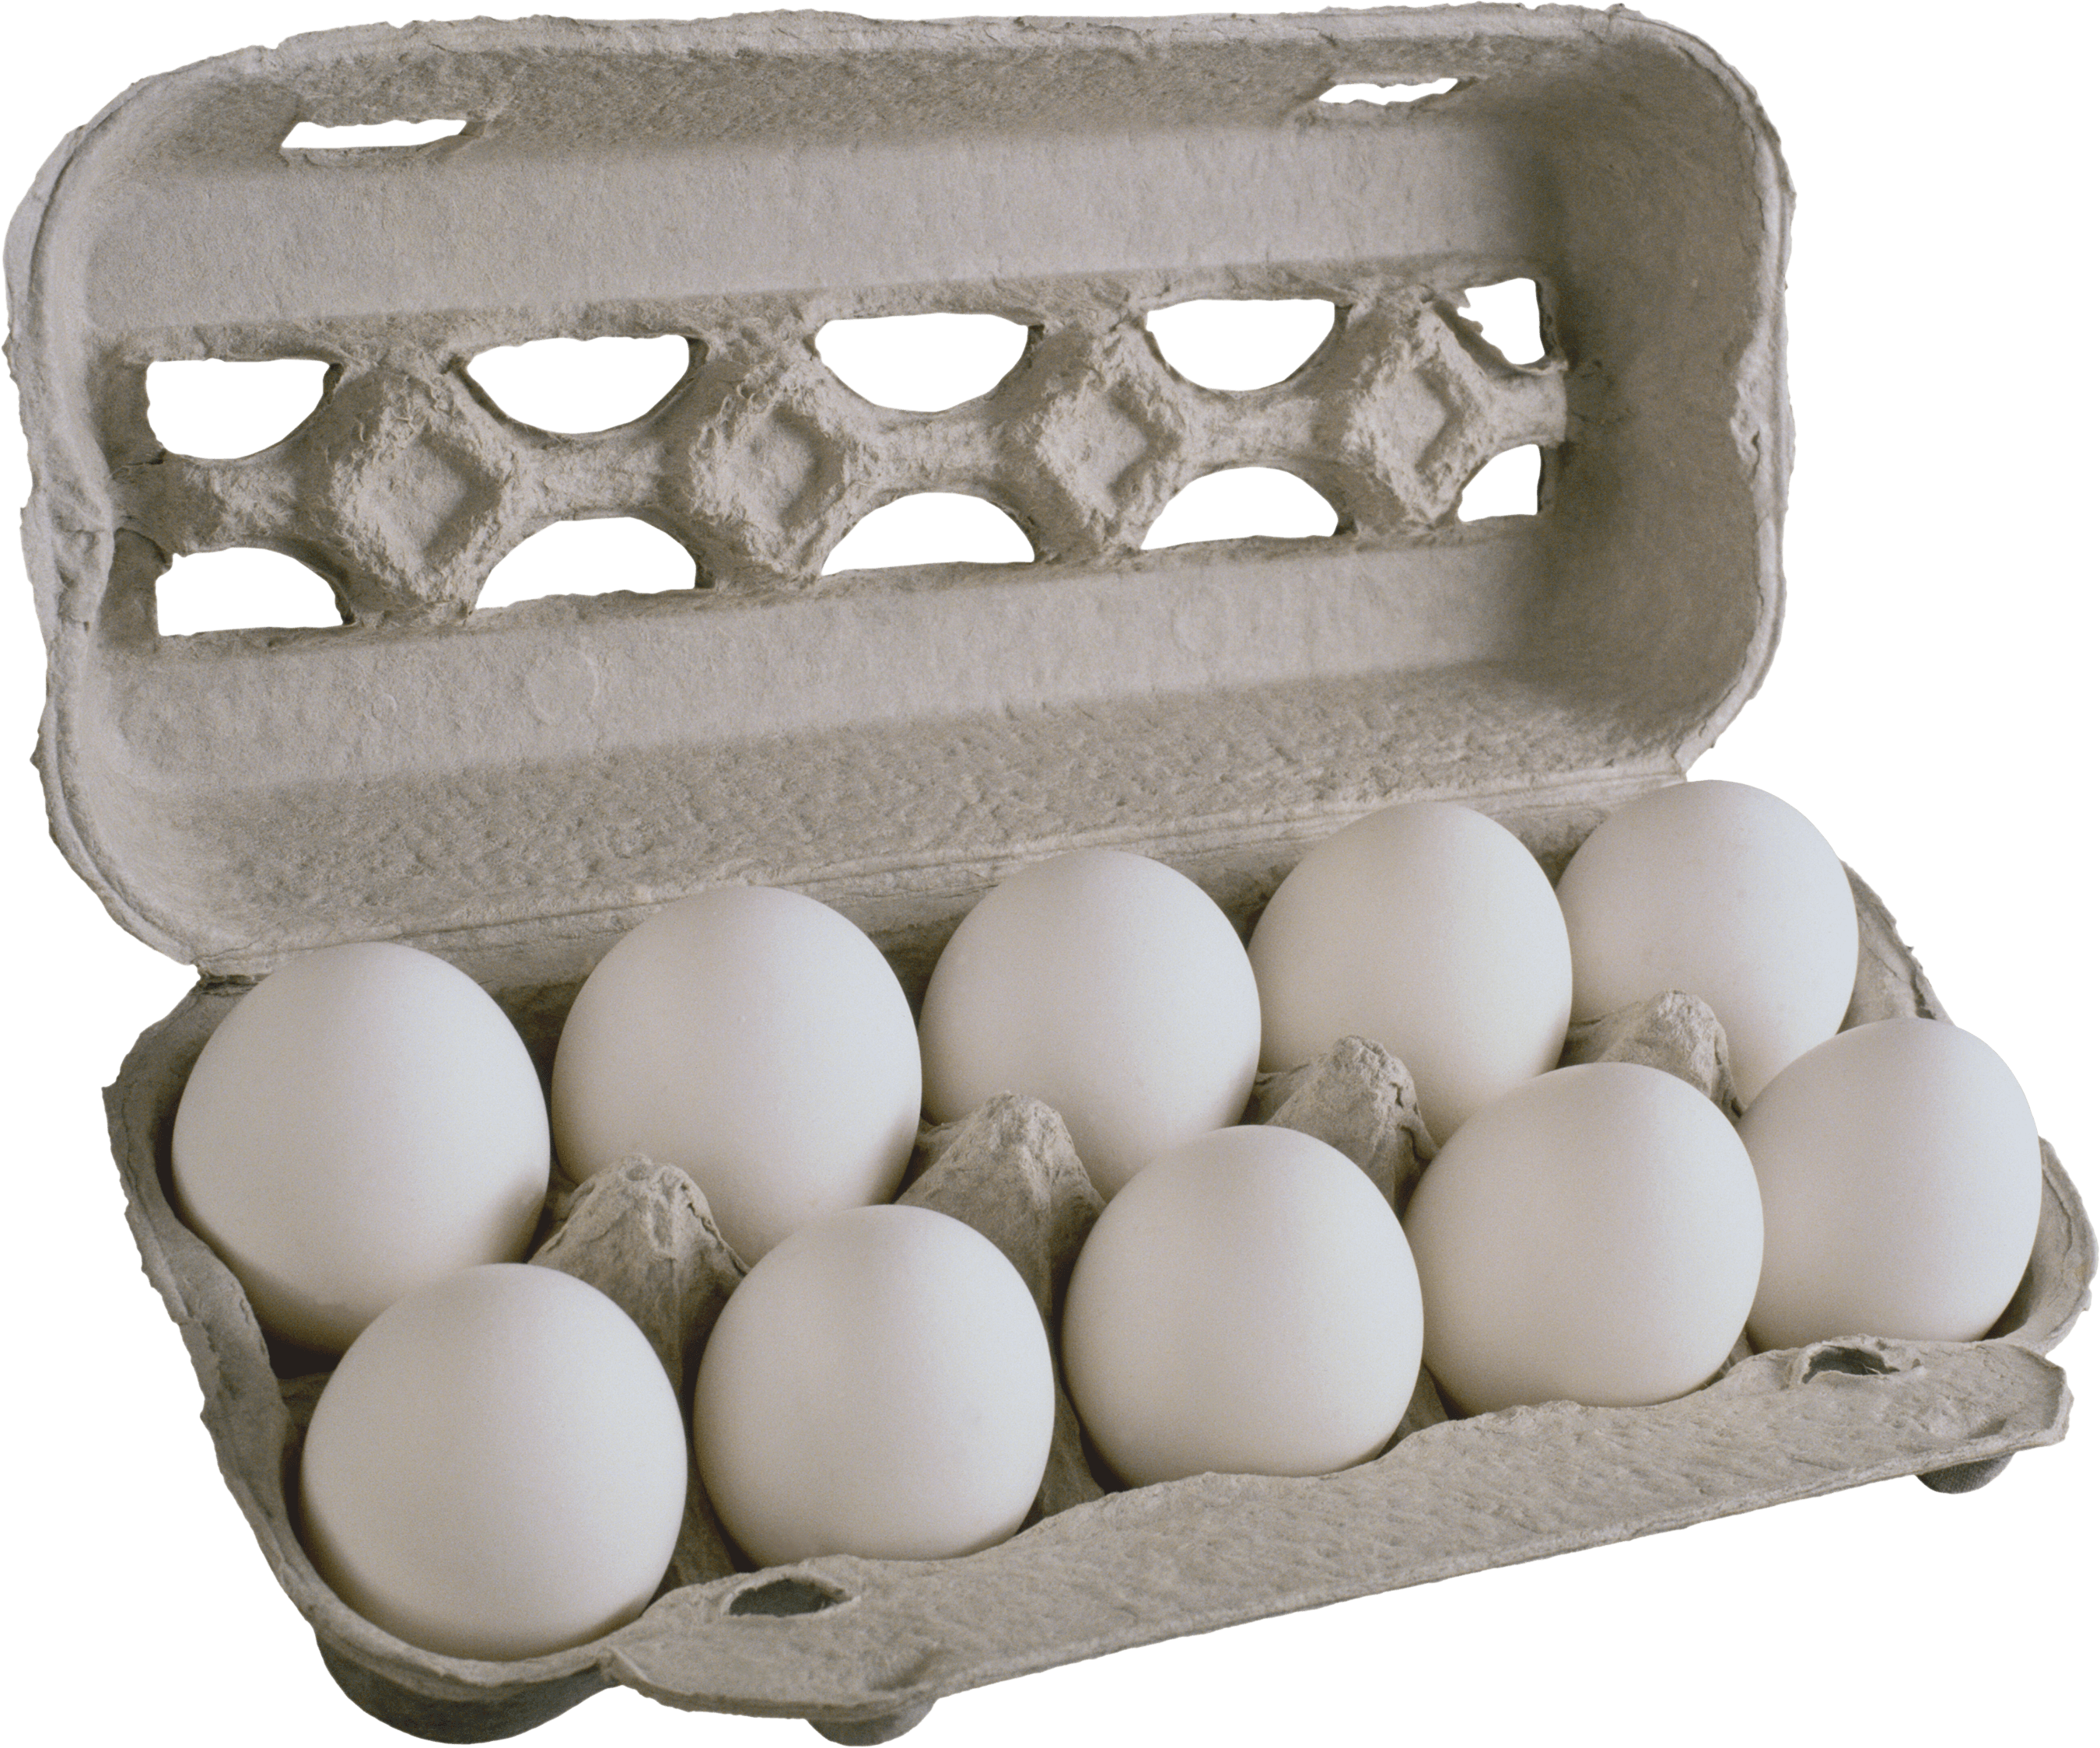 Png image purepng free. Eggs clipart egg whites